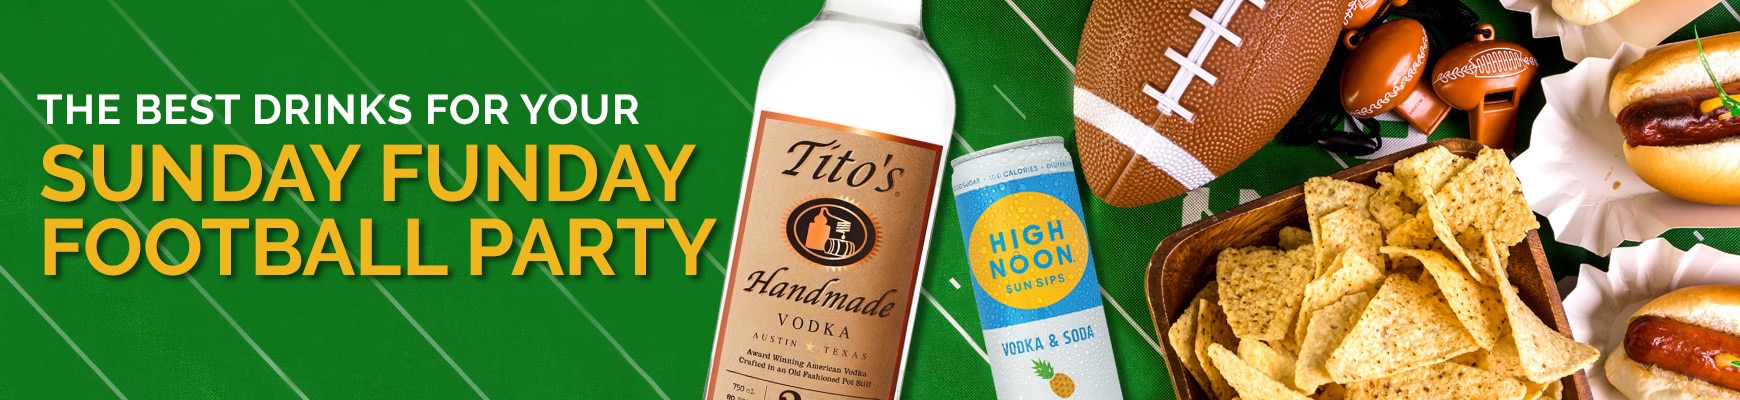 The Best Drinks for Your Sunday Funday Football Party